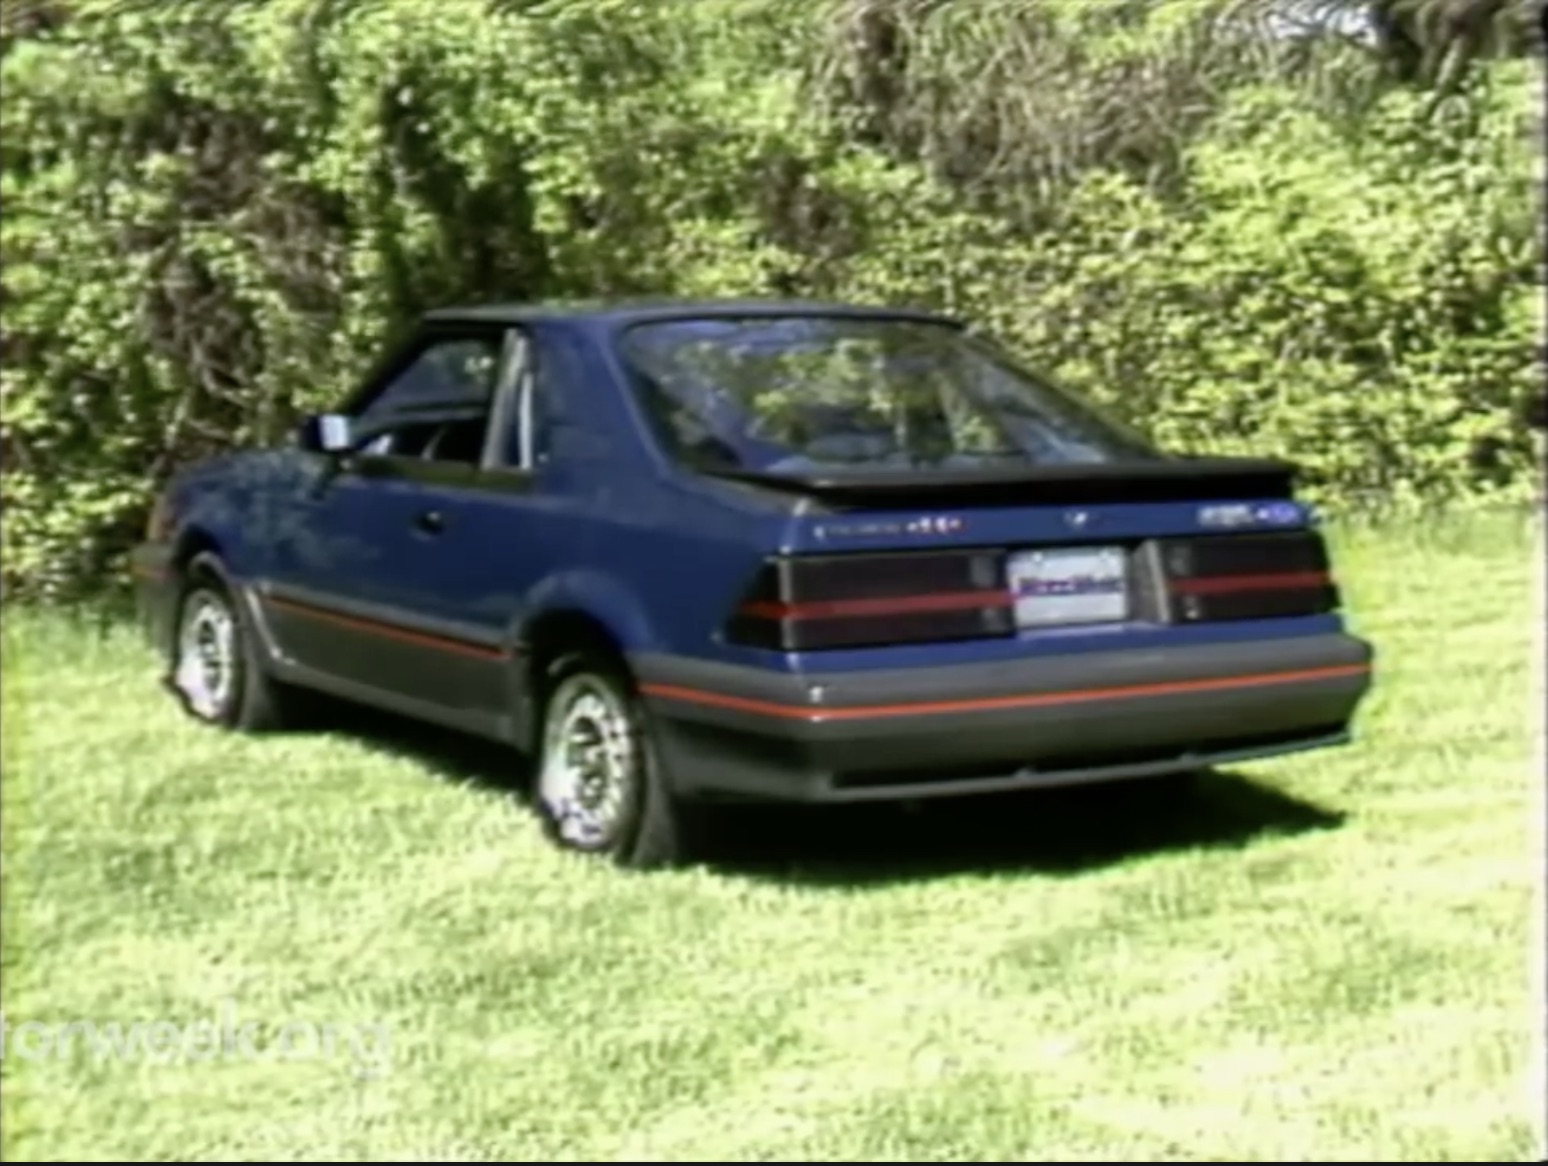 History Lesson: The 1980s Front-Drive Offerings In The Name Of Performance